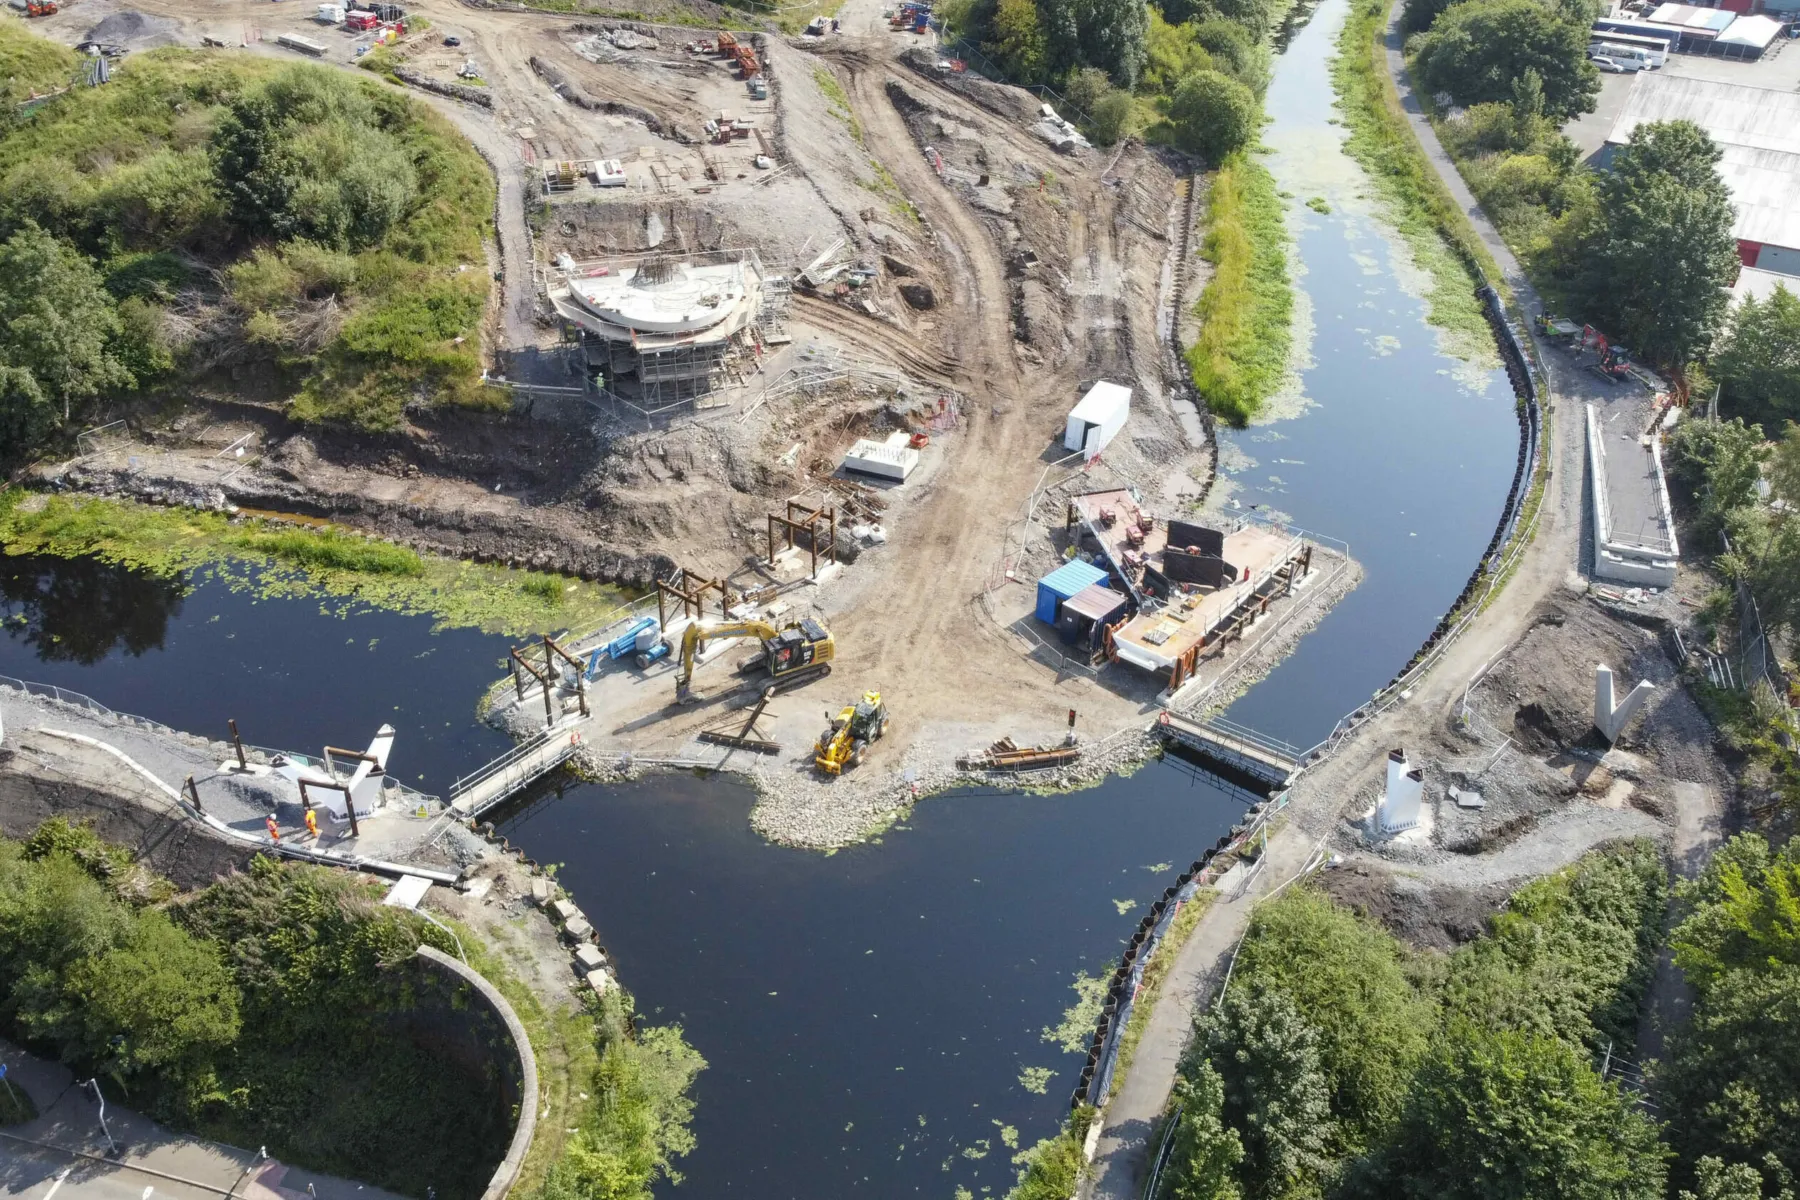 Construction site during the building of Stockingfield Bridge, Glasgow. Temporary causeways over two sections of canal at the forked junction of two sections of the Forth and Clyde Canal. The site is shown in summer with earth works underway and the early stages of the bridge tower in progress.